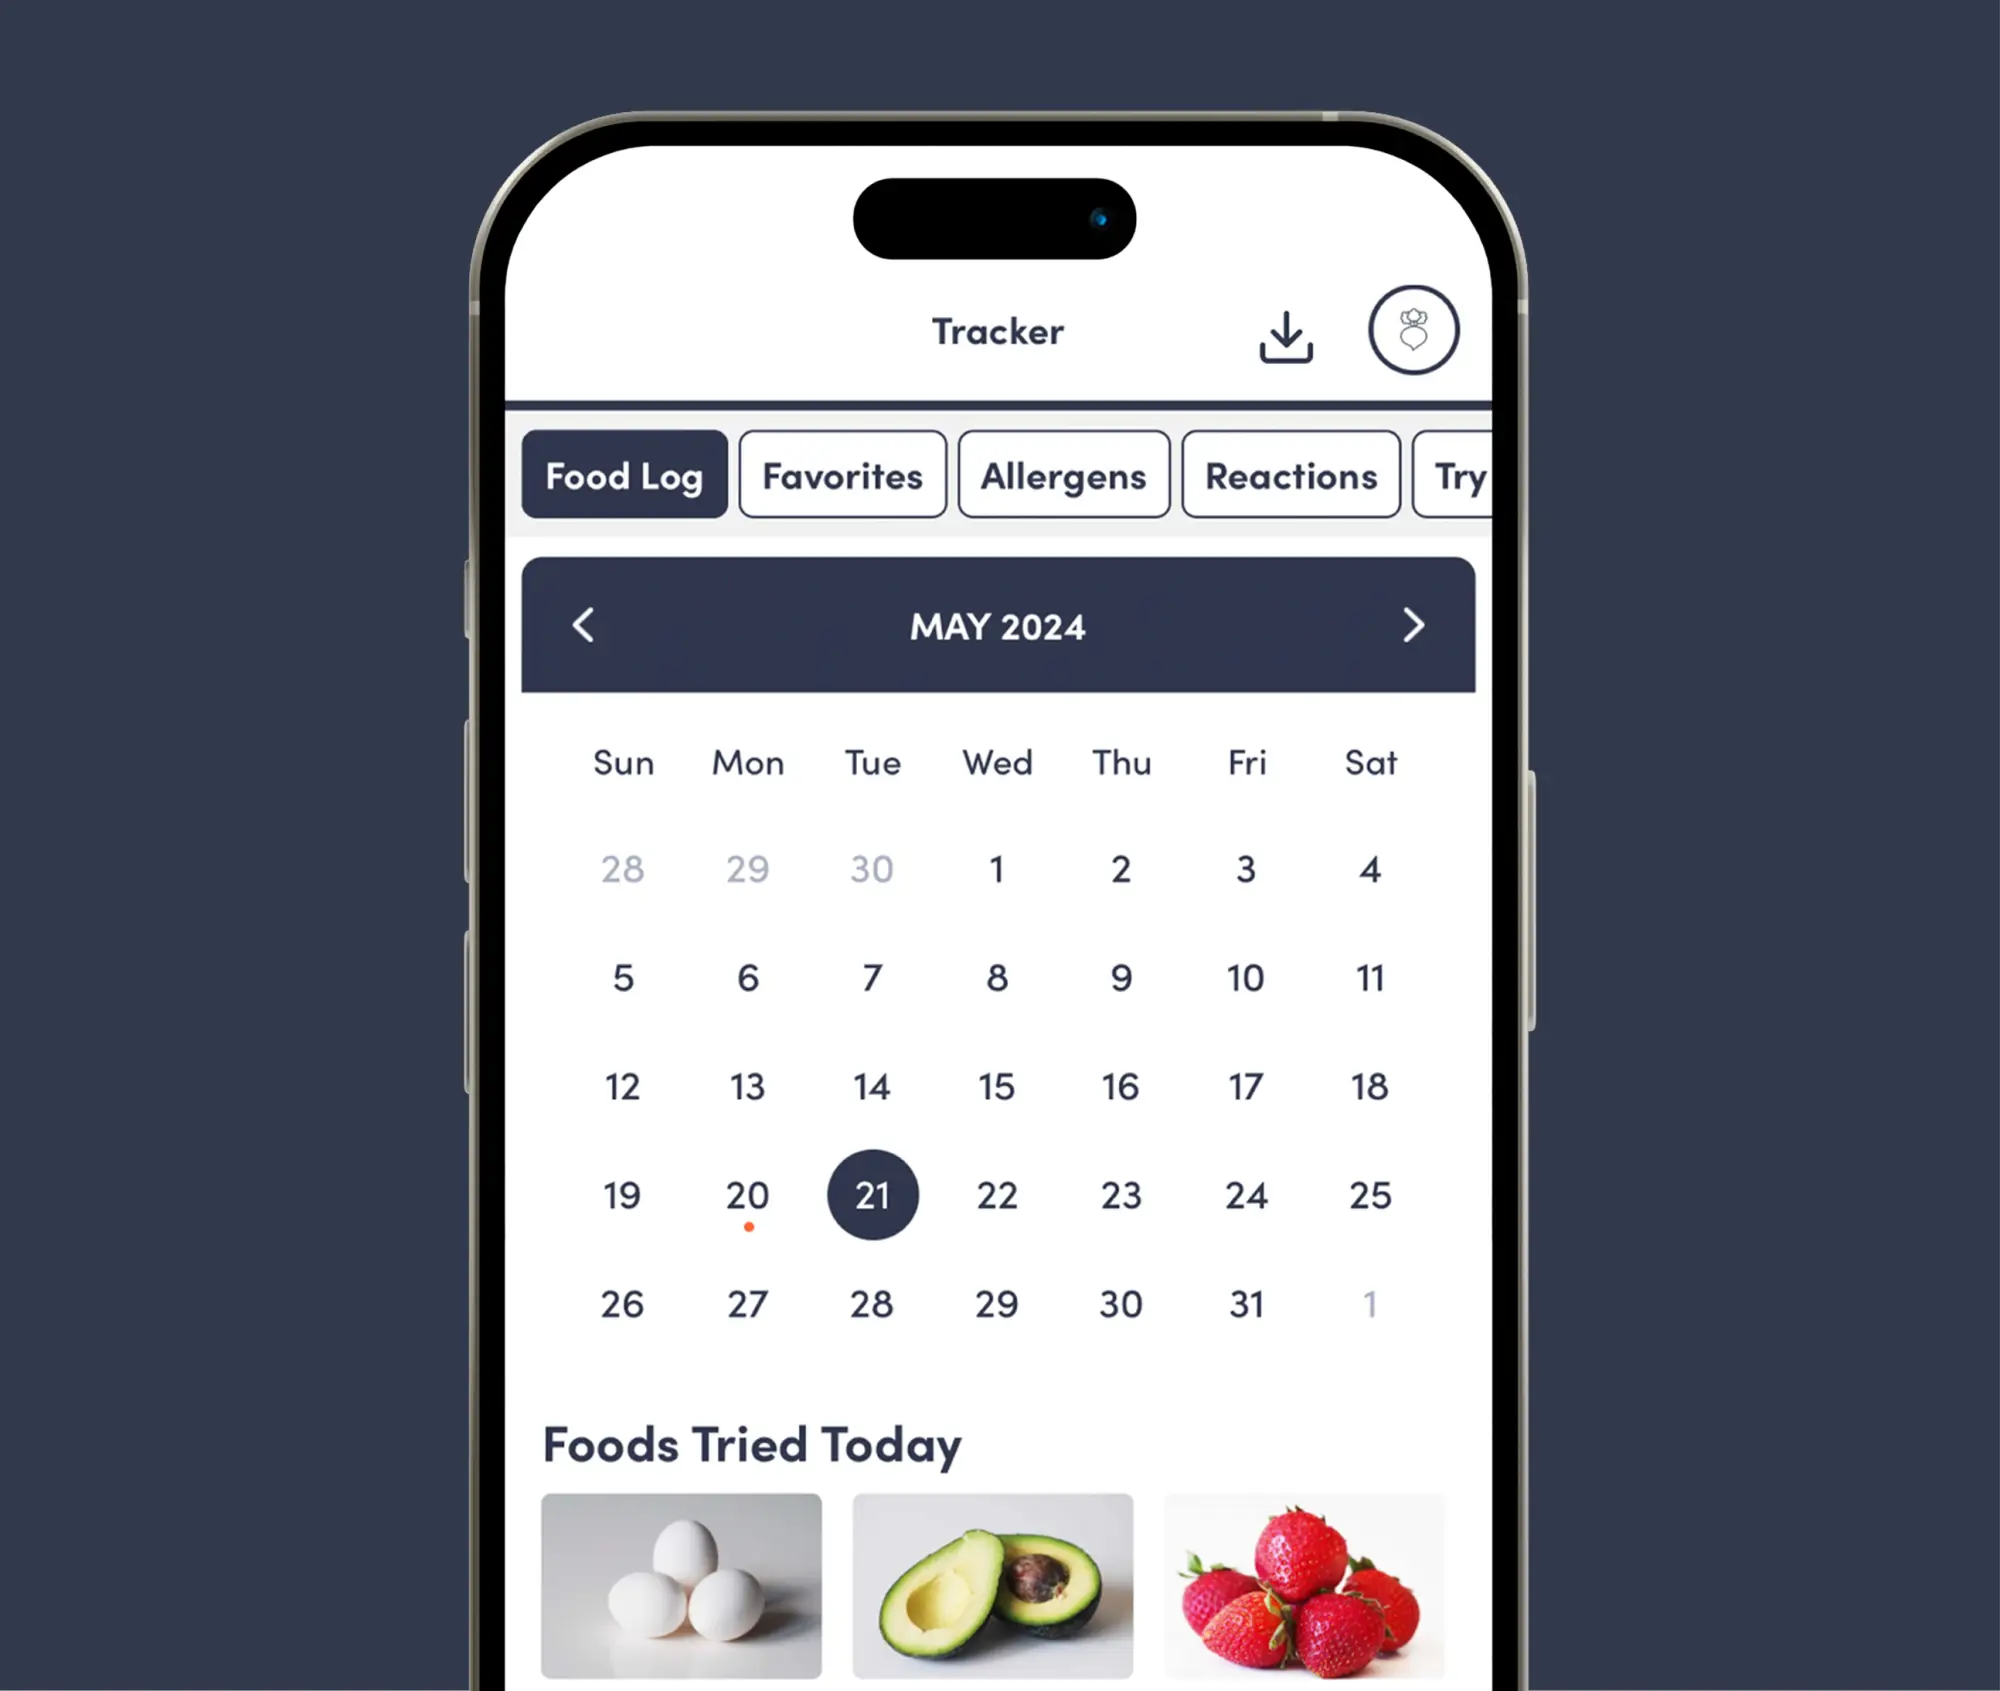 Smart Tools To Simplify Mealtime: Track foods and allergens, log sensory reactions, get daily meal suggestions, and access resources by licensed pediatric experts.